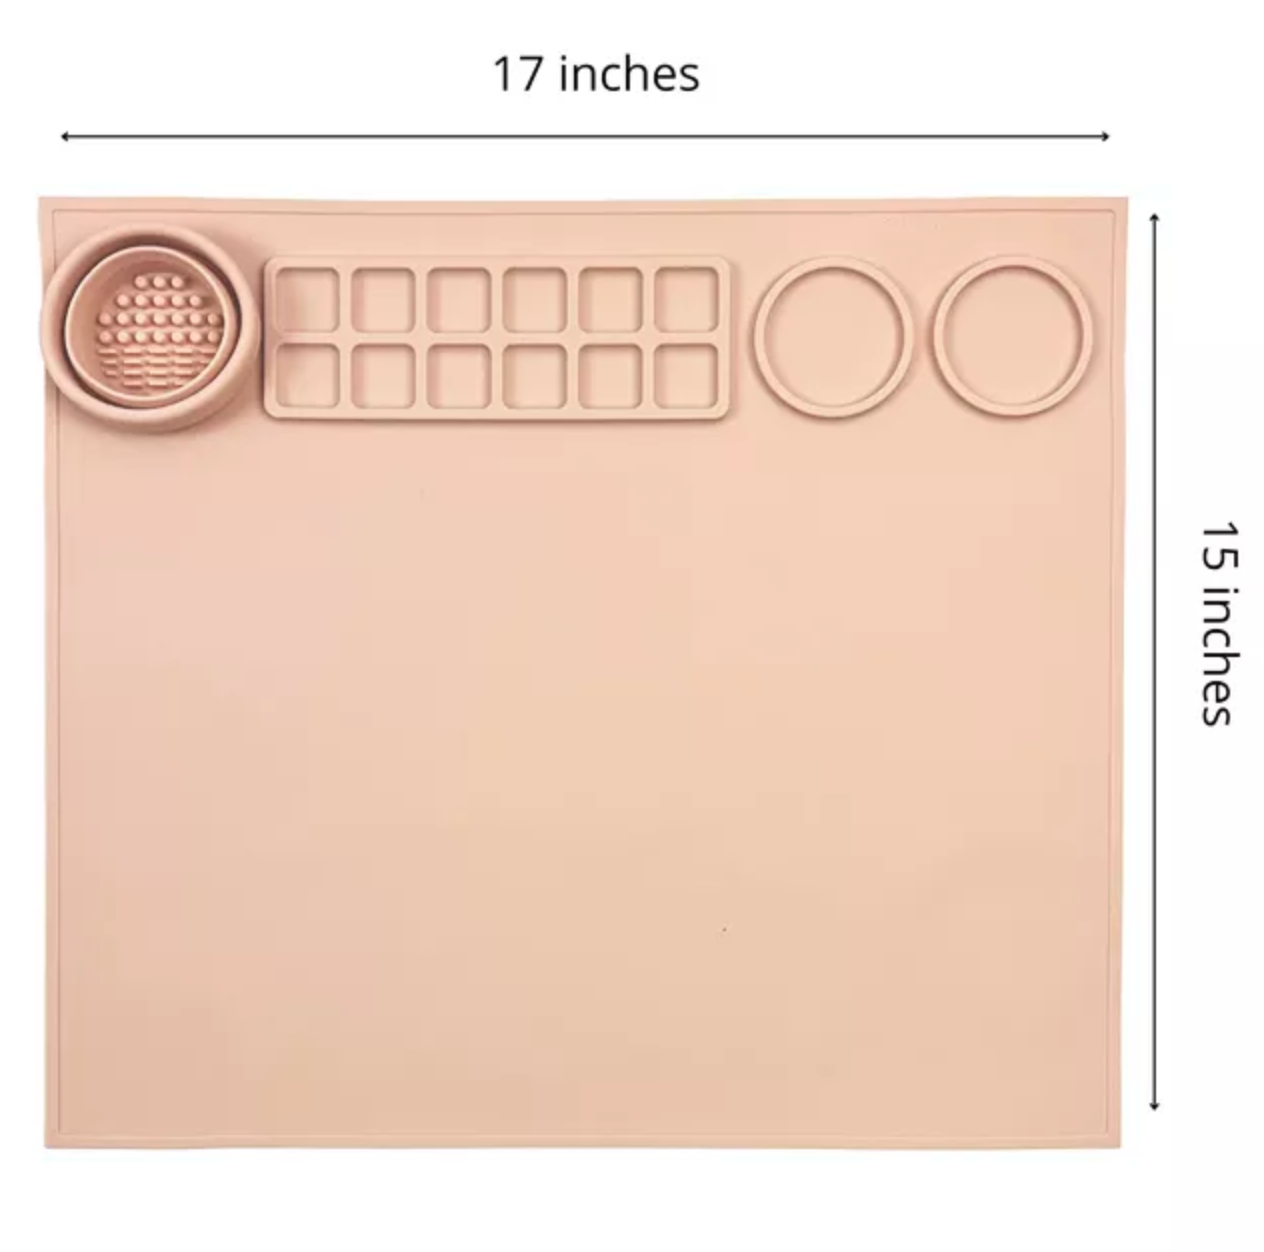 Silicone Activity Painting Mat Pink